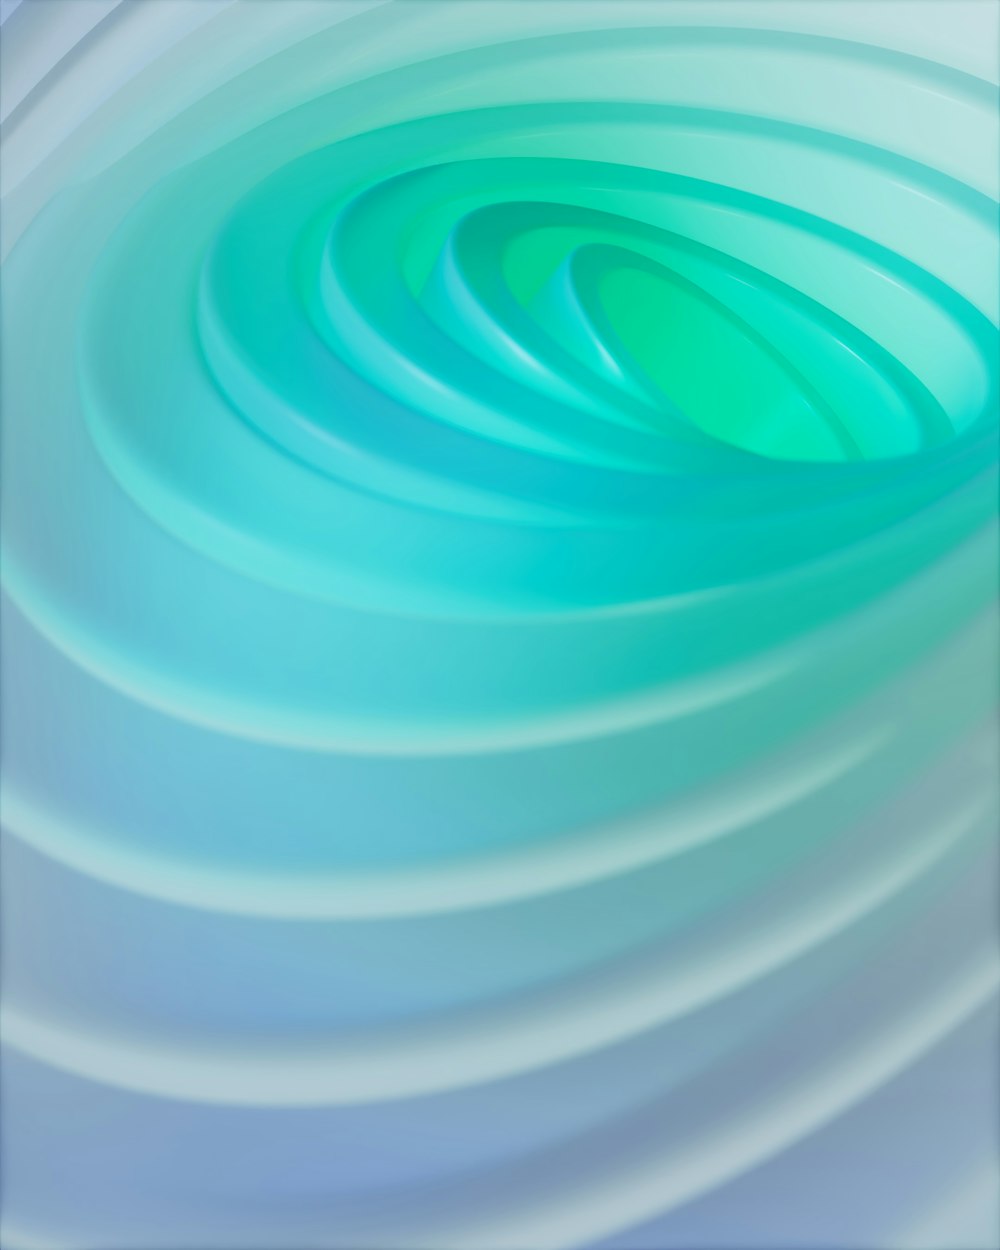 a picture of a blue and green swirl